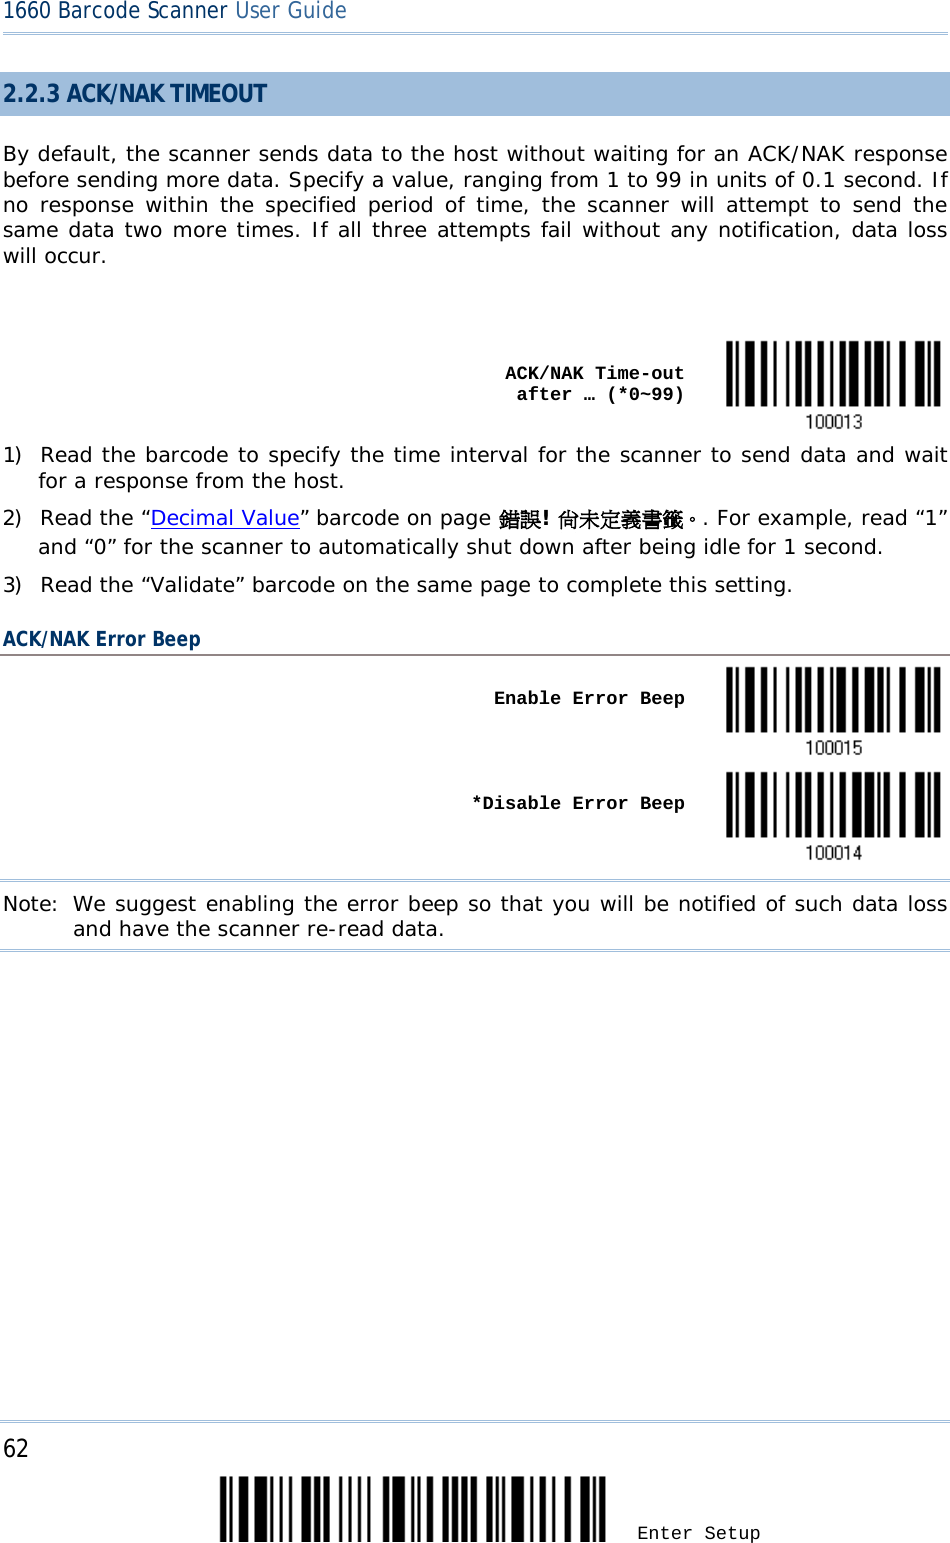 62 Enter Setup 1660 Barcode Scanner User Guide  2.2.3 ACK/NAK TIMEOUT By default, the scanner sends data to the host without waiting for an ACK/NAK response before sending more data. Specify a value, ranging from 1 to 99 in units of 0.1 second. If no response within the specified period of time, the scanner will attempt to send the same data two more times. If all three attempts fail without any notification, data loss will occur.     ACK/NAK Time-out after … (*0~99)  1) Read the barcode to specify the time interval for the scanner to send data and wait for a response from the host.       2) Read the “Decimal Value” barcode on page 錯誤! 尚未定義書籤。. For example, read “1” and “0” for the scanner to automatically shut down after being idle for 1 second.  3) Read the “Validate” barcode on the same page to complete this setting. ACK/NAK Error Beep    Enable Error Beep       *Disable Error Beep  Note: We suggest enabling the error beep so that you will be notified of such data loss and have the scanner re-read data.          